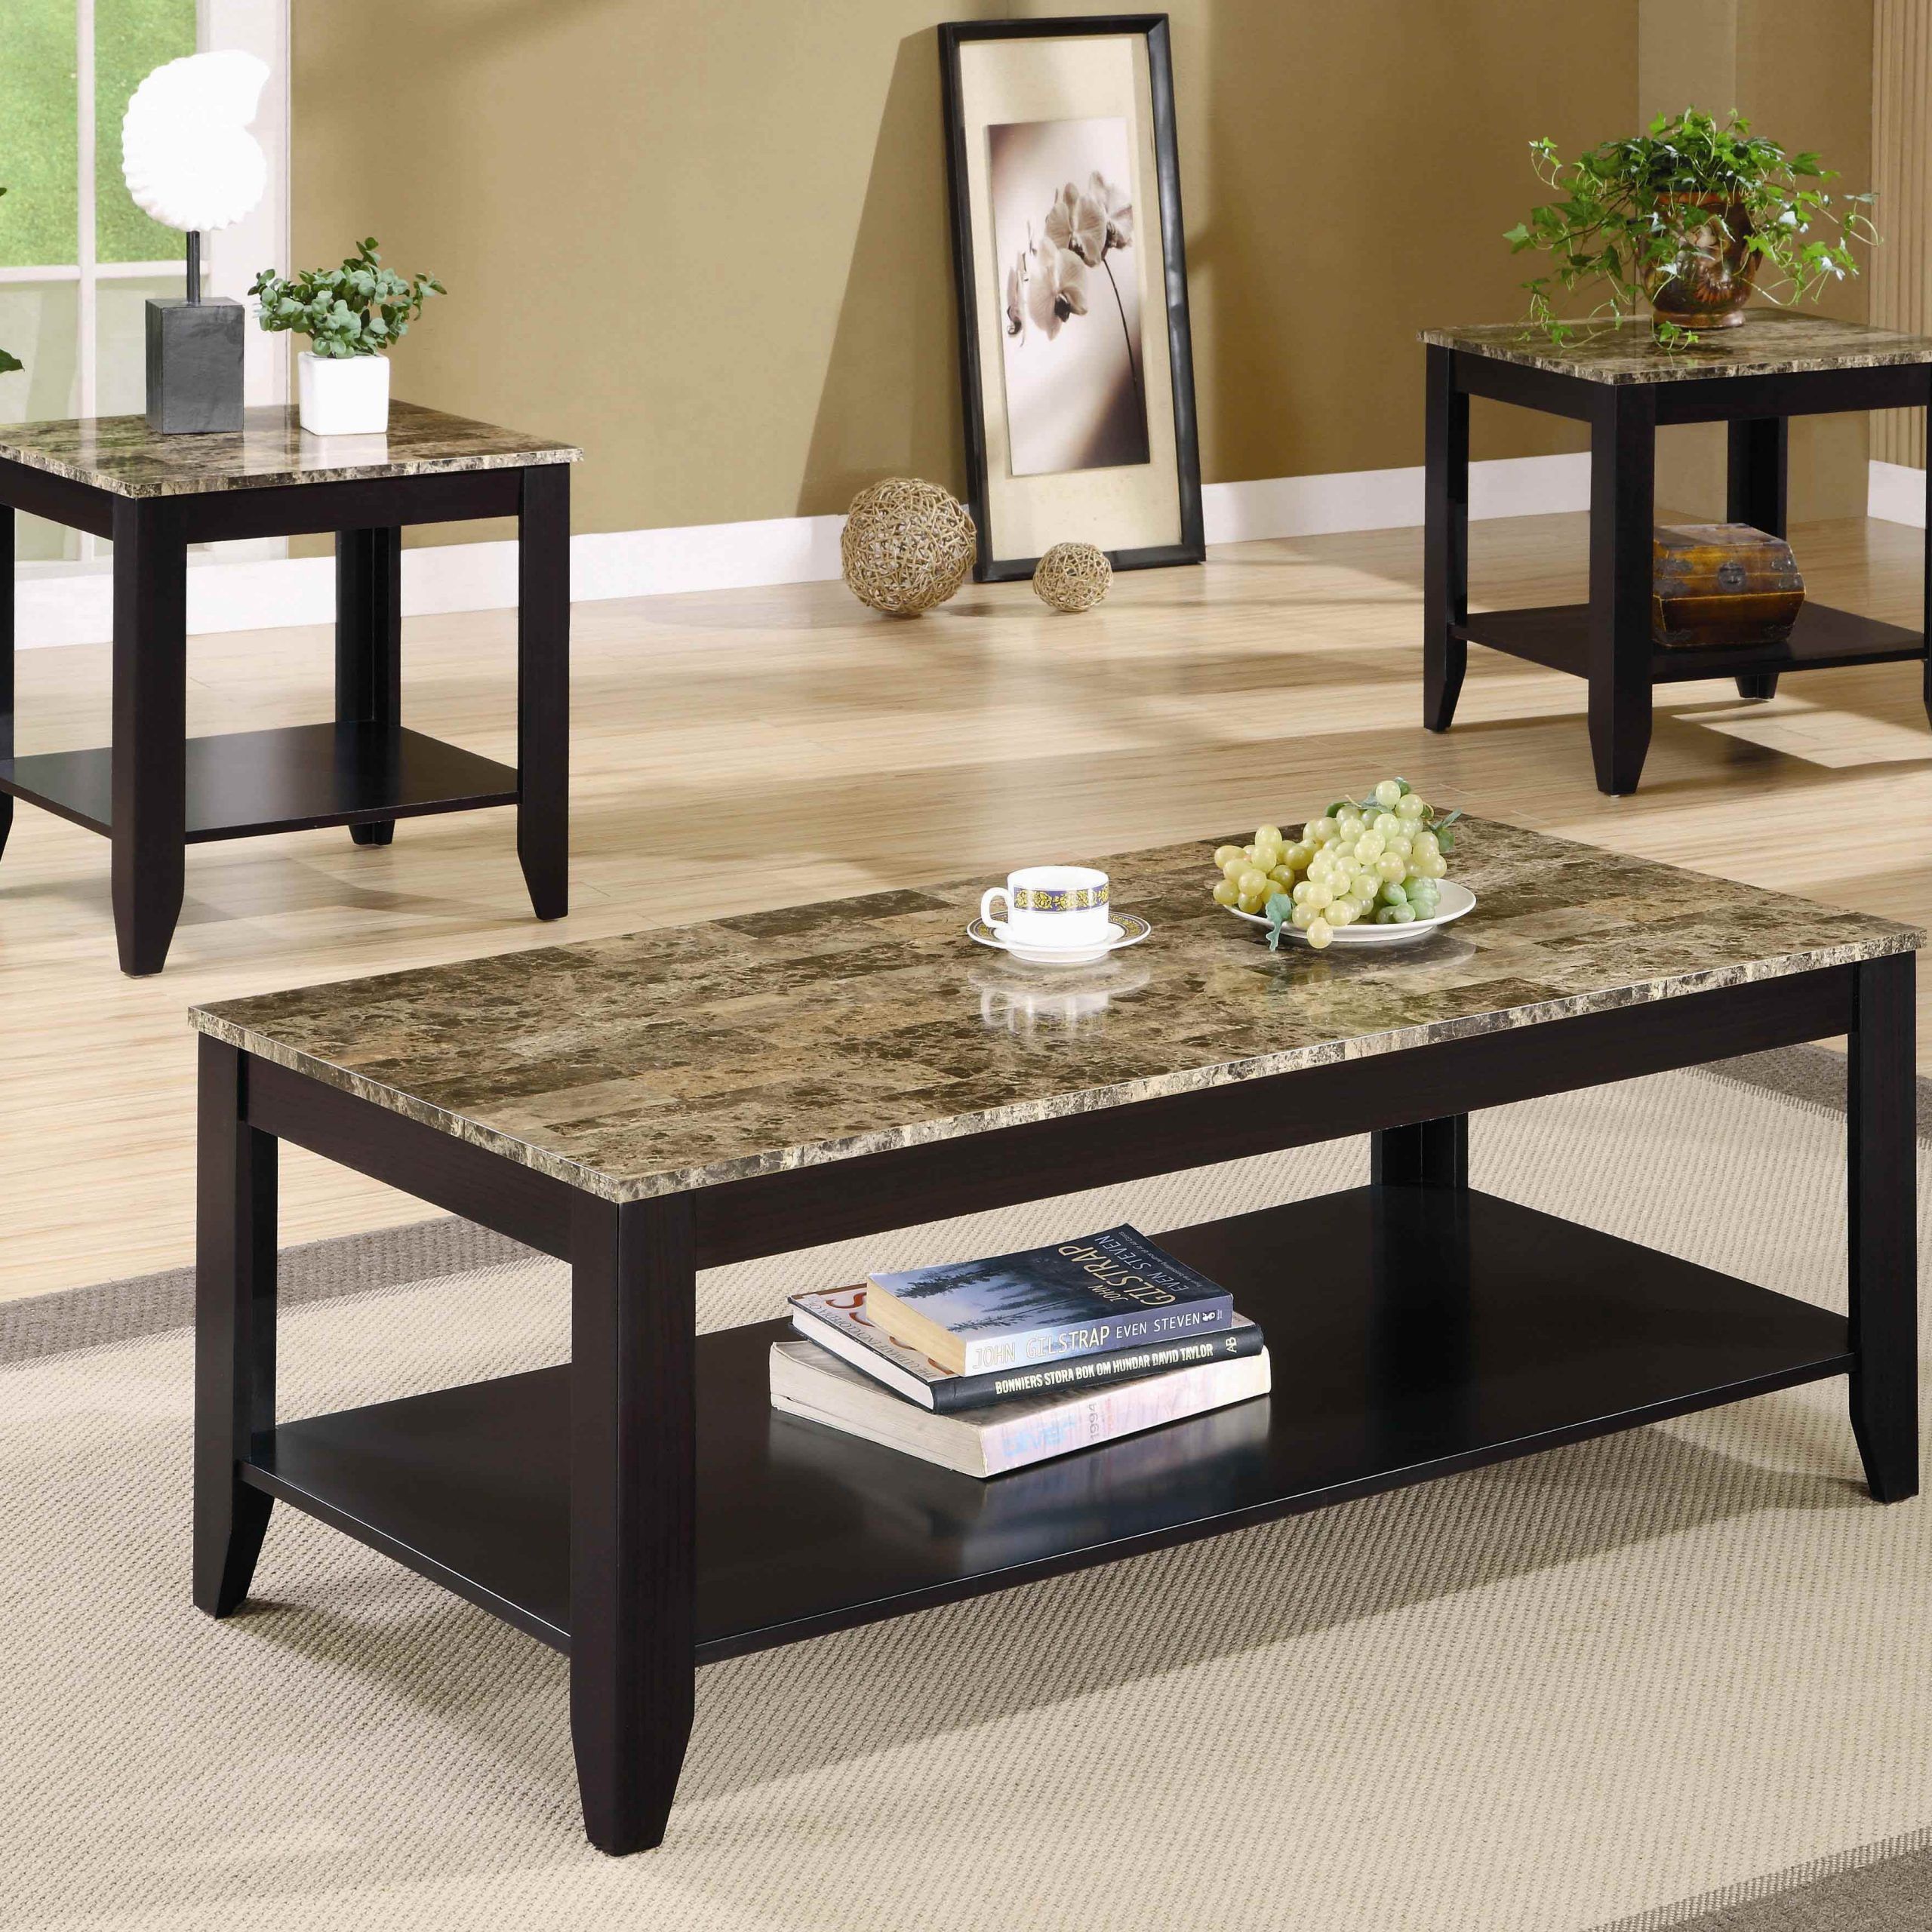 Most Recent Black Coffee And End Table Sets Furniture (View 7 of 20)